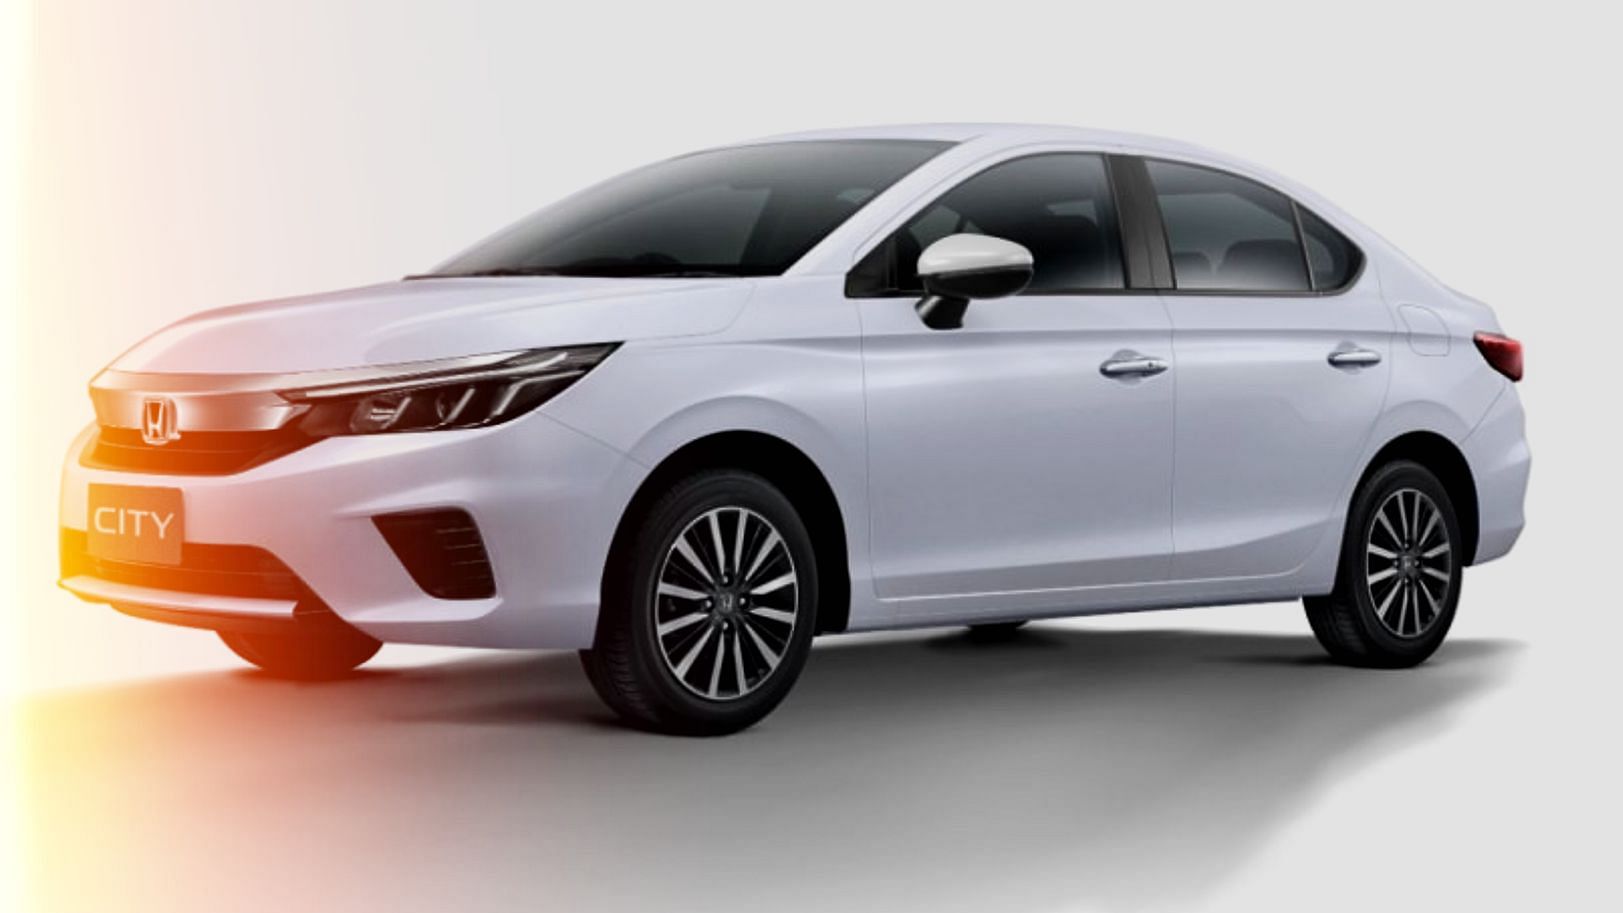 The 2020 Honda City will come to India late next year.